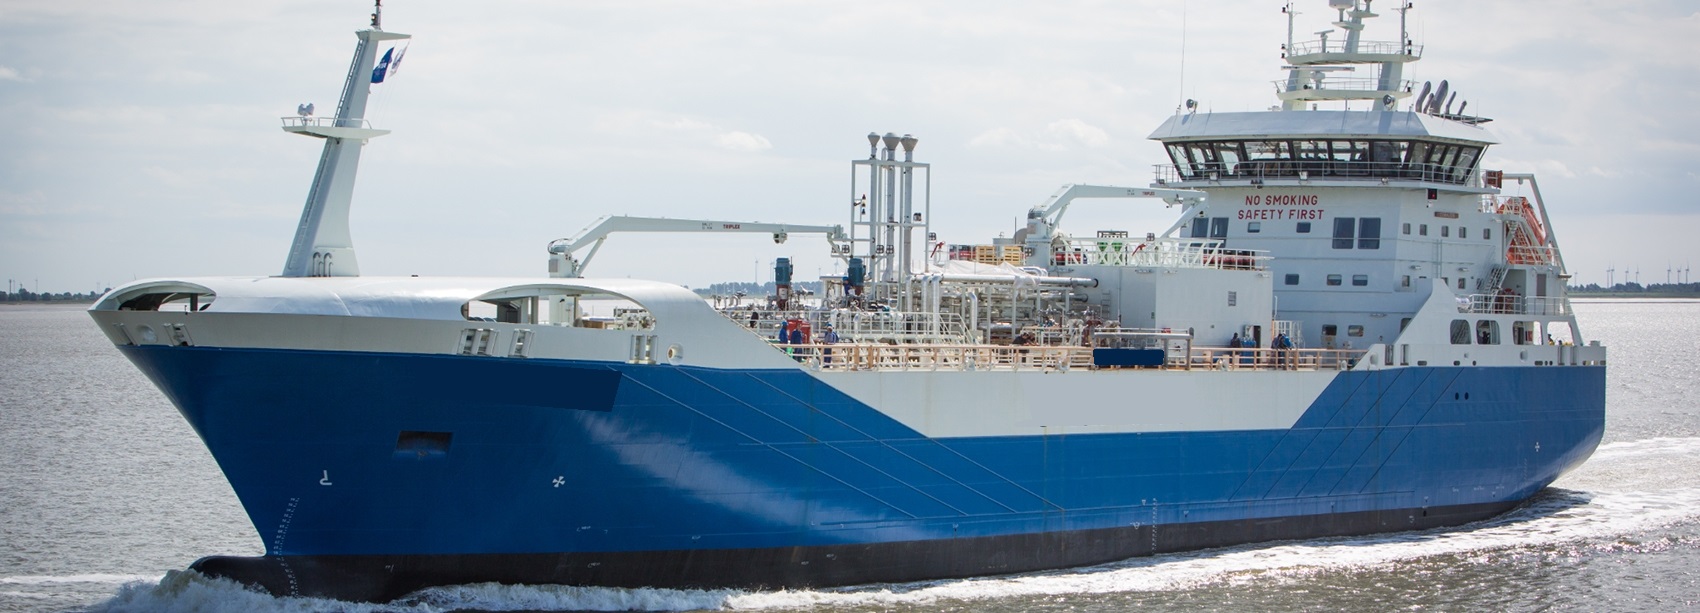 LNG Bunkering Market Size and Share with Applications and Forecast by 2024